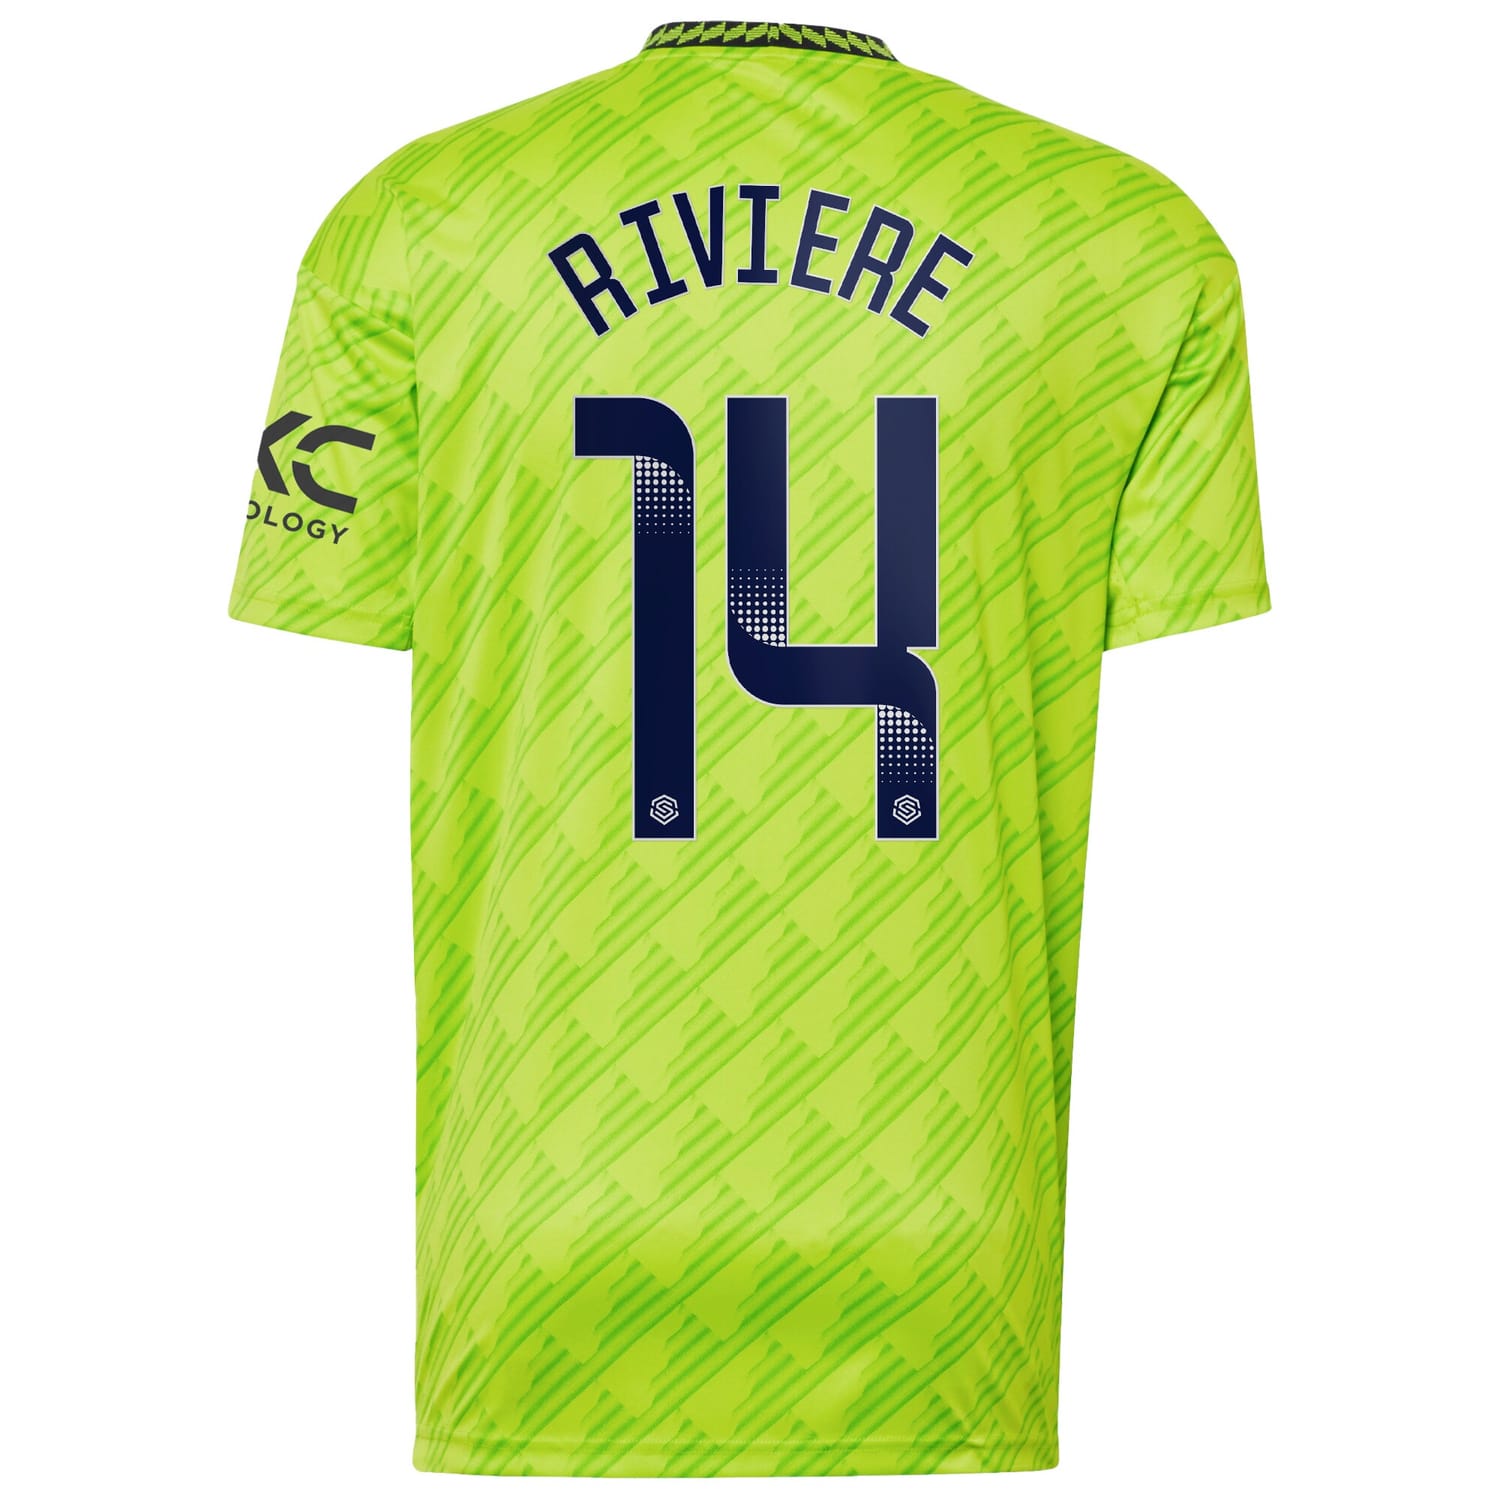 Premier League Manchester United Third WSL Jersey Shirt 2022-23 player Jayde Riviere 14 printing for Men